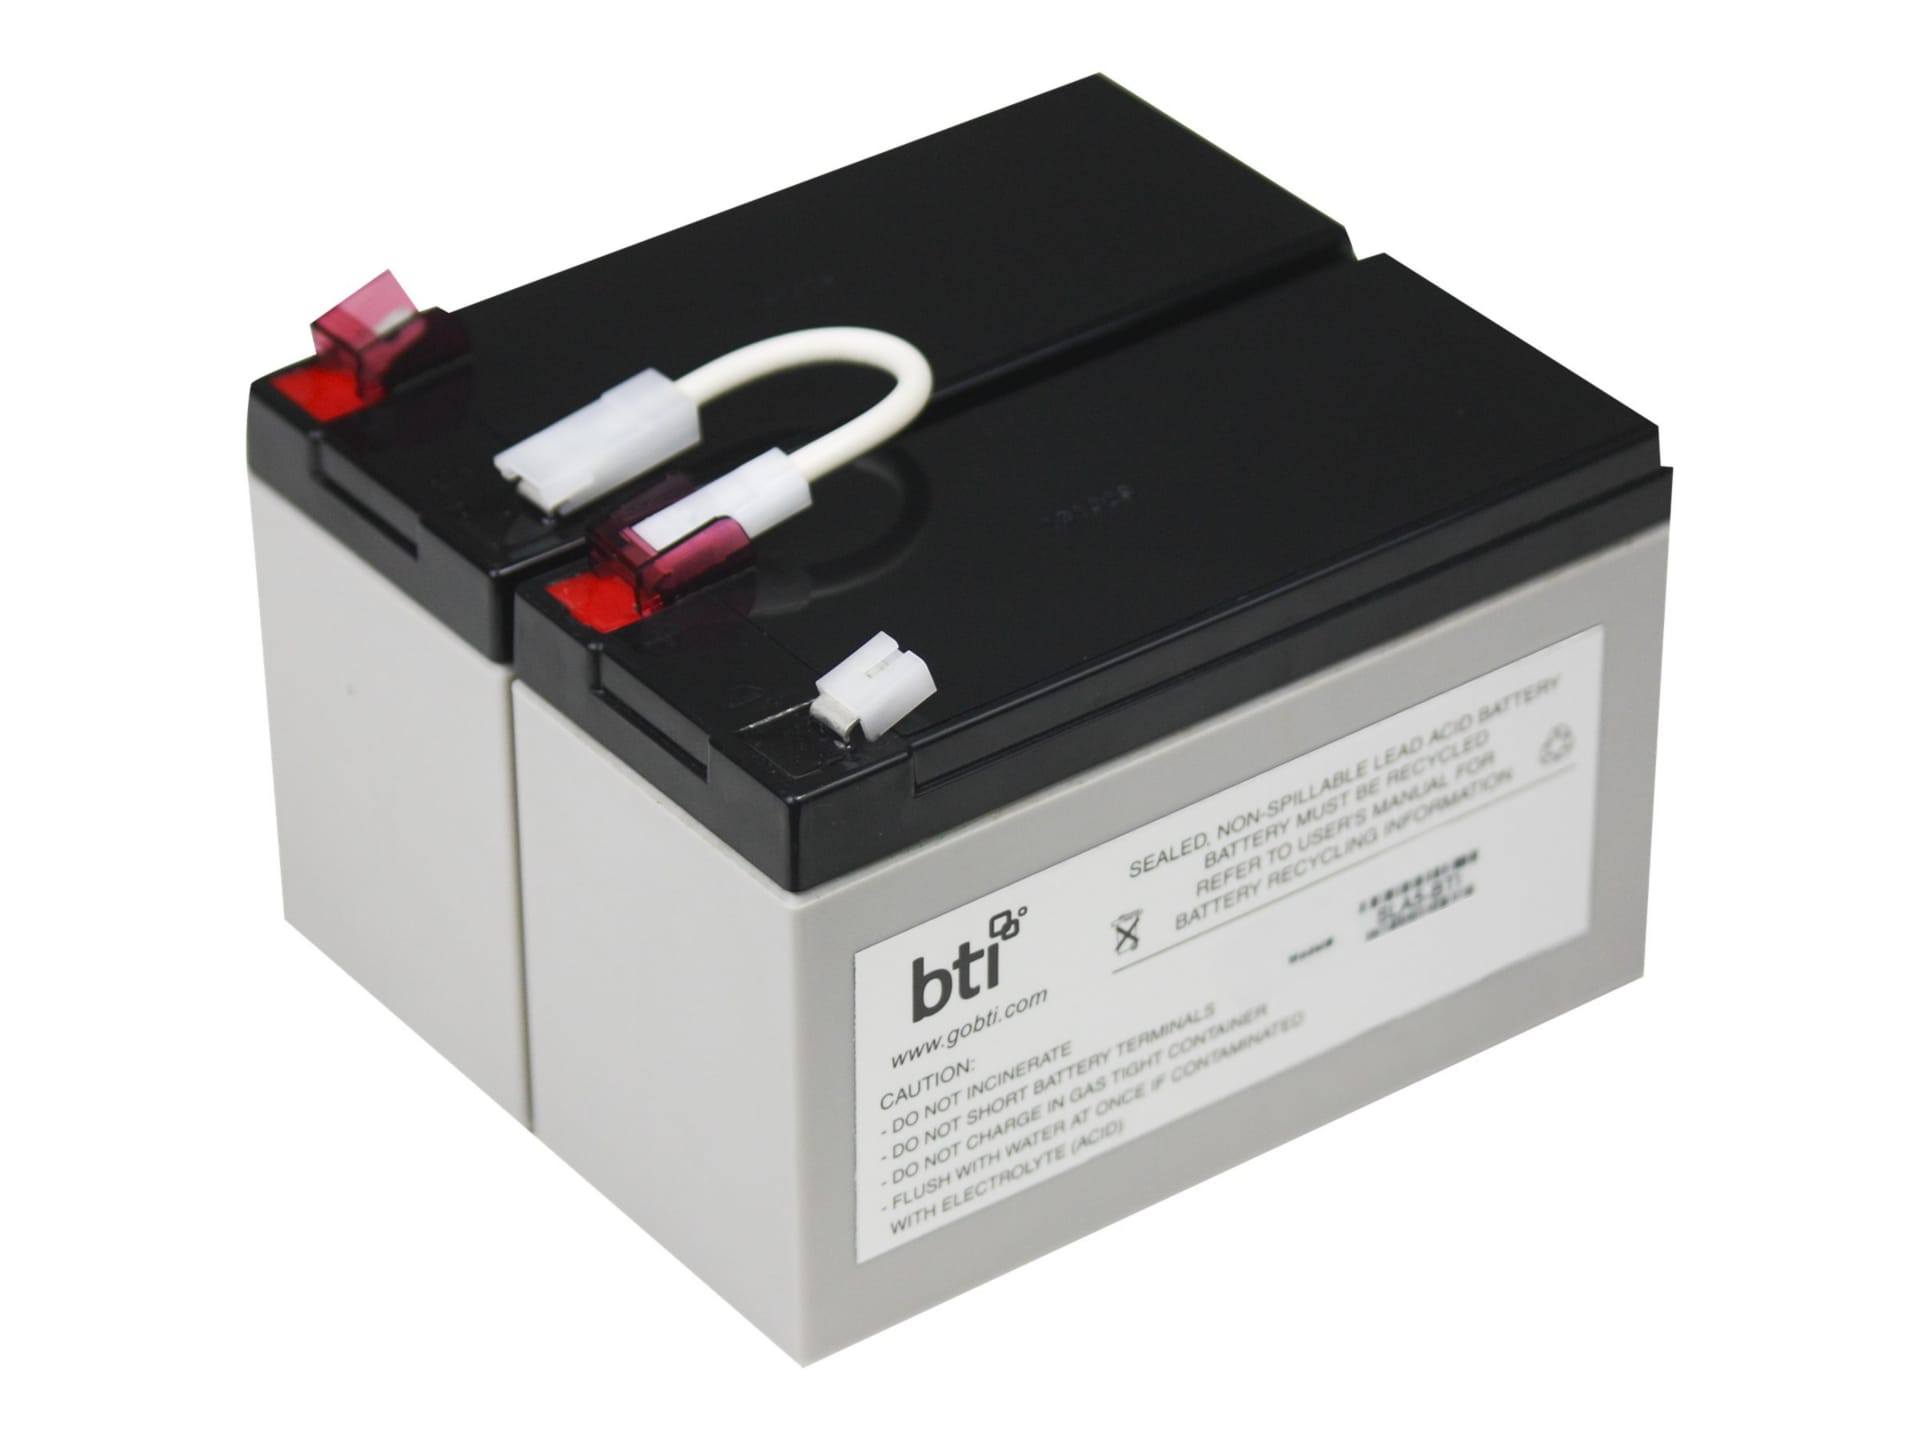 Battery Technology – BTI Replacement Battery for the RBC5 UPS Battery